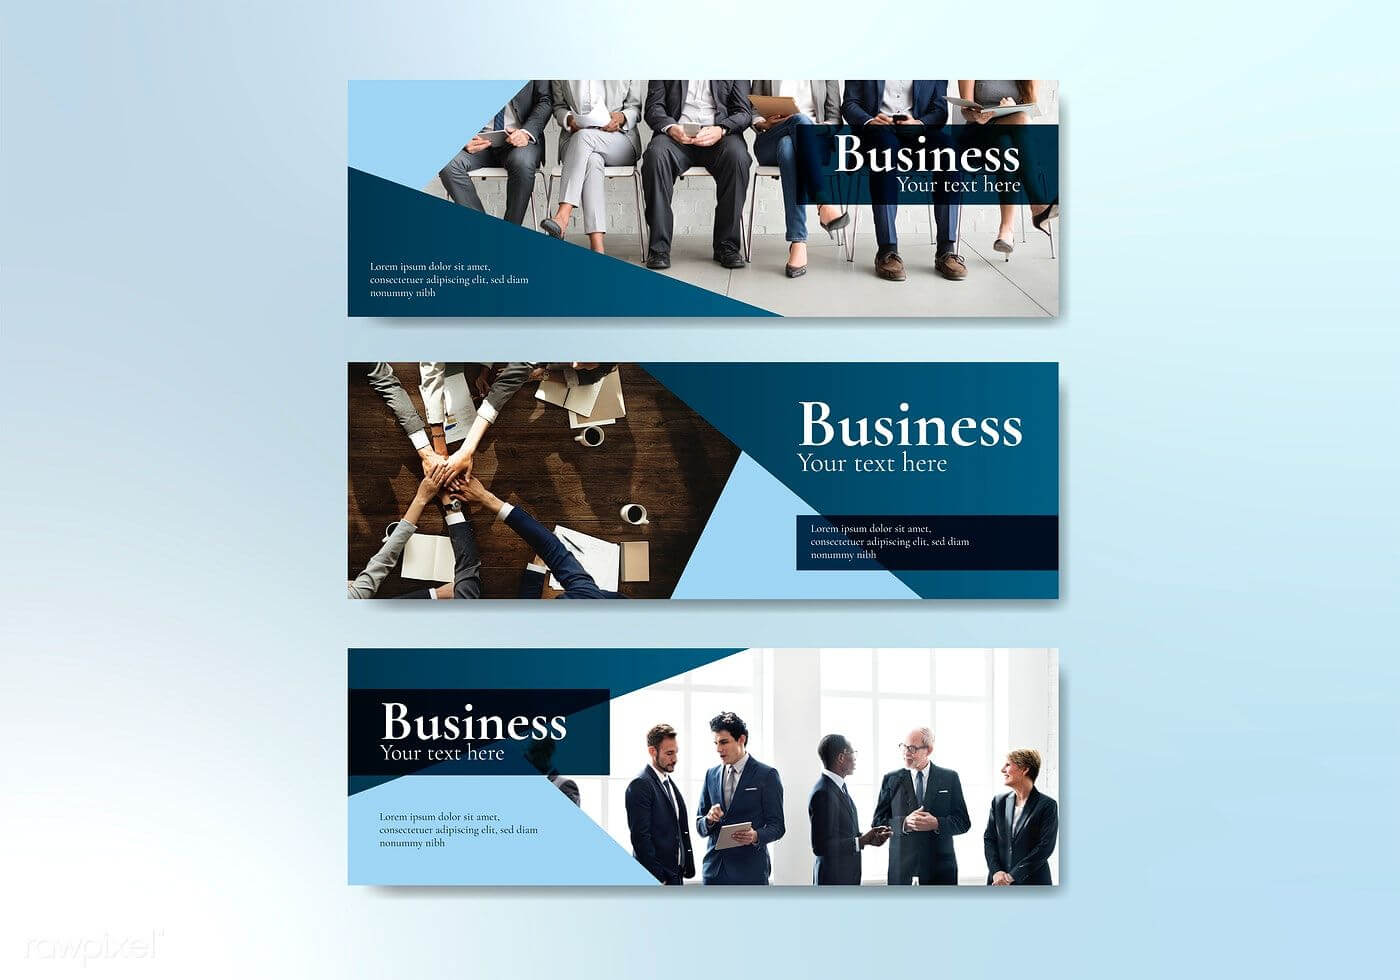 Business Website Banner Design Vector | Free Image Intended For Photography Banner Template